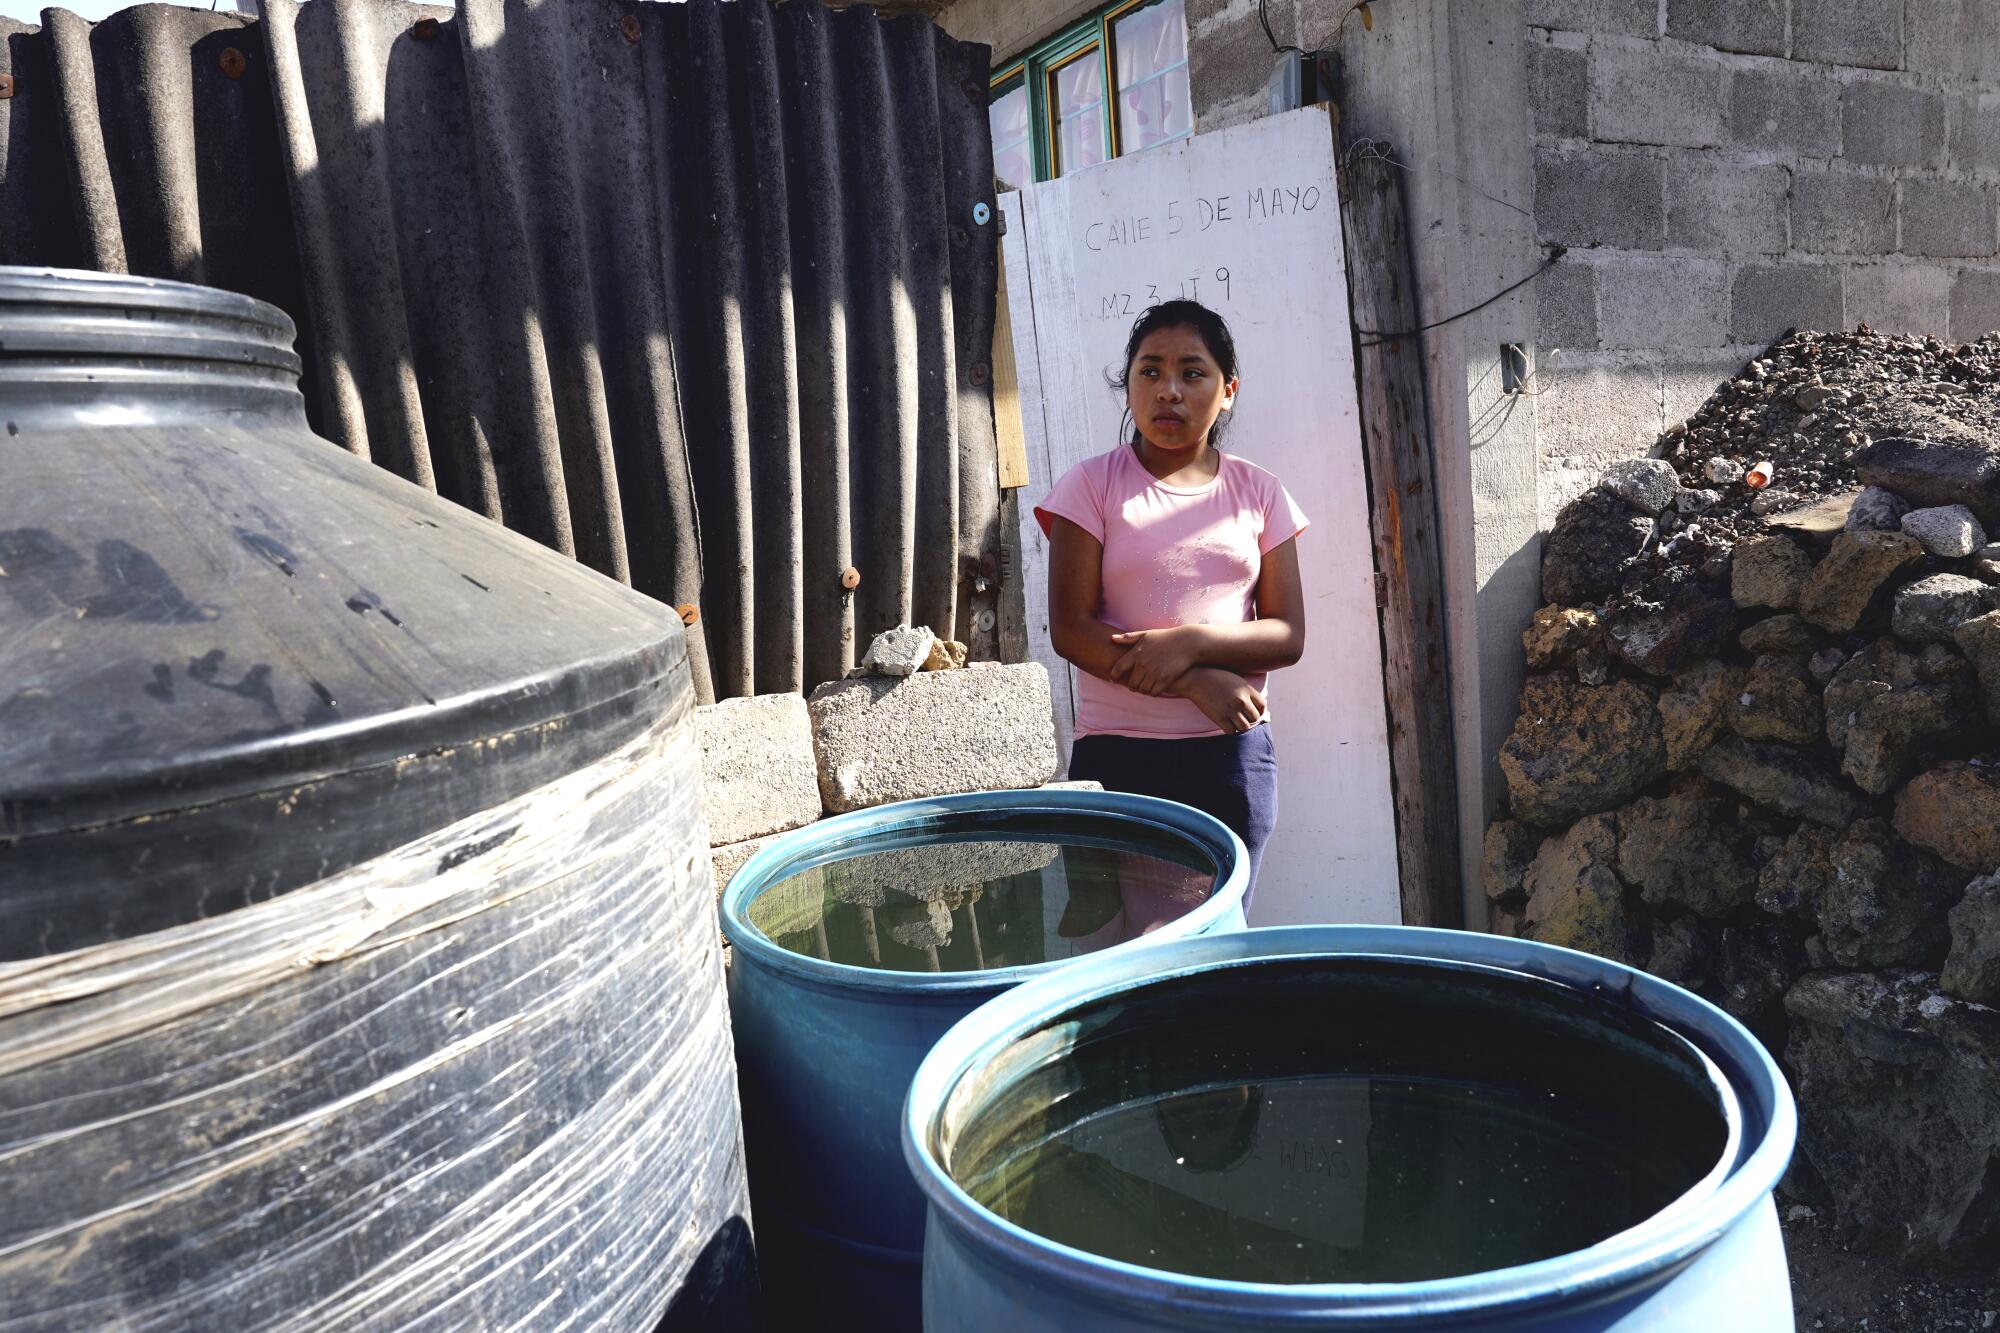 A young woman in a pink top stands by barrels of water. 